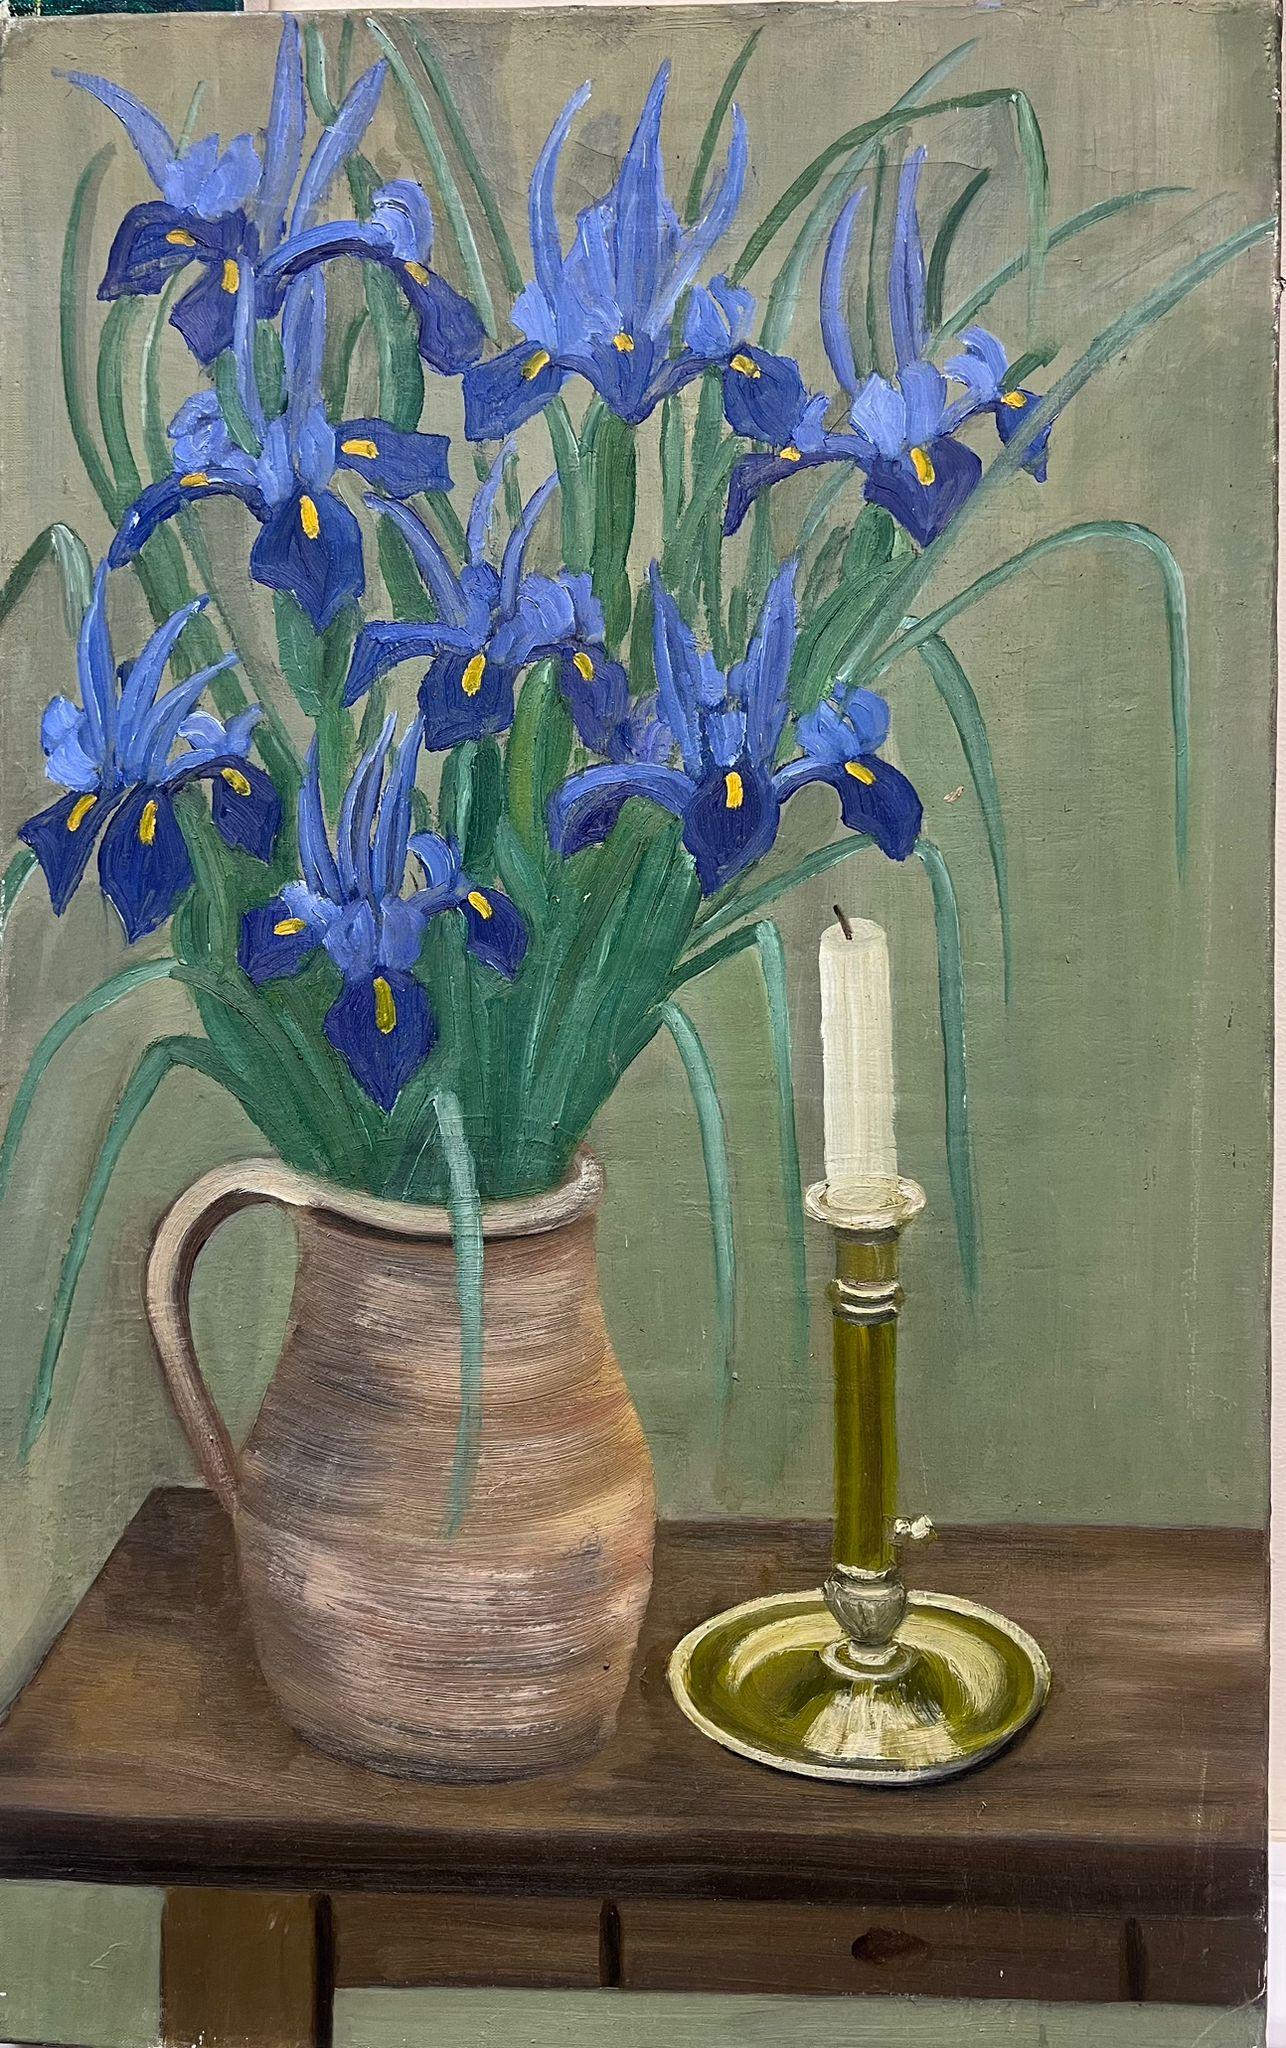 Irises
by Louise Alix (French, 1888-1980) *see notes below
provenance stamp to the back  
oil painting on canvas, unframed
measures: 24 high by 15 inches wide
condition: overall very good and sound, a few scuffs and marks to the surface and wear to